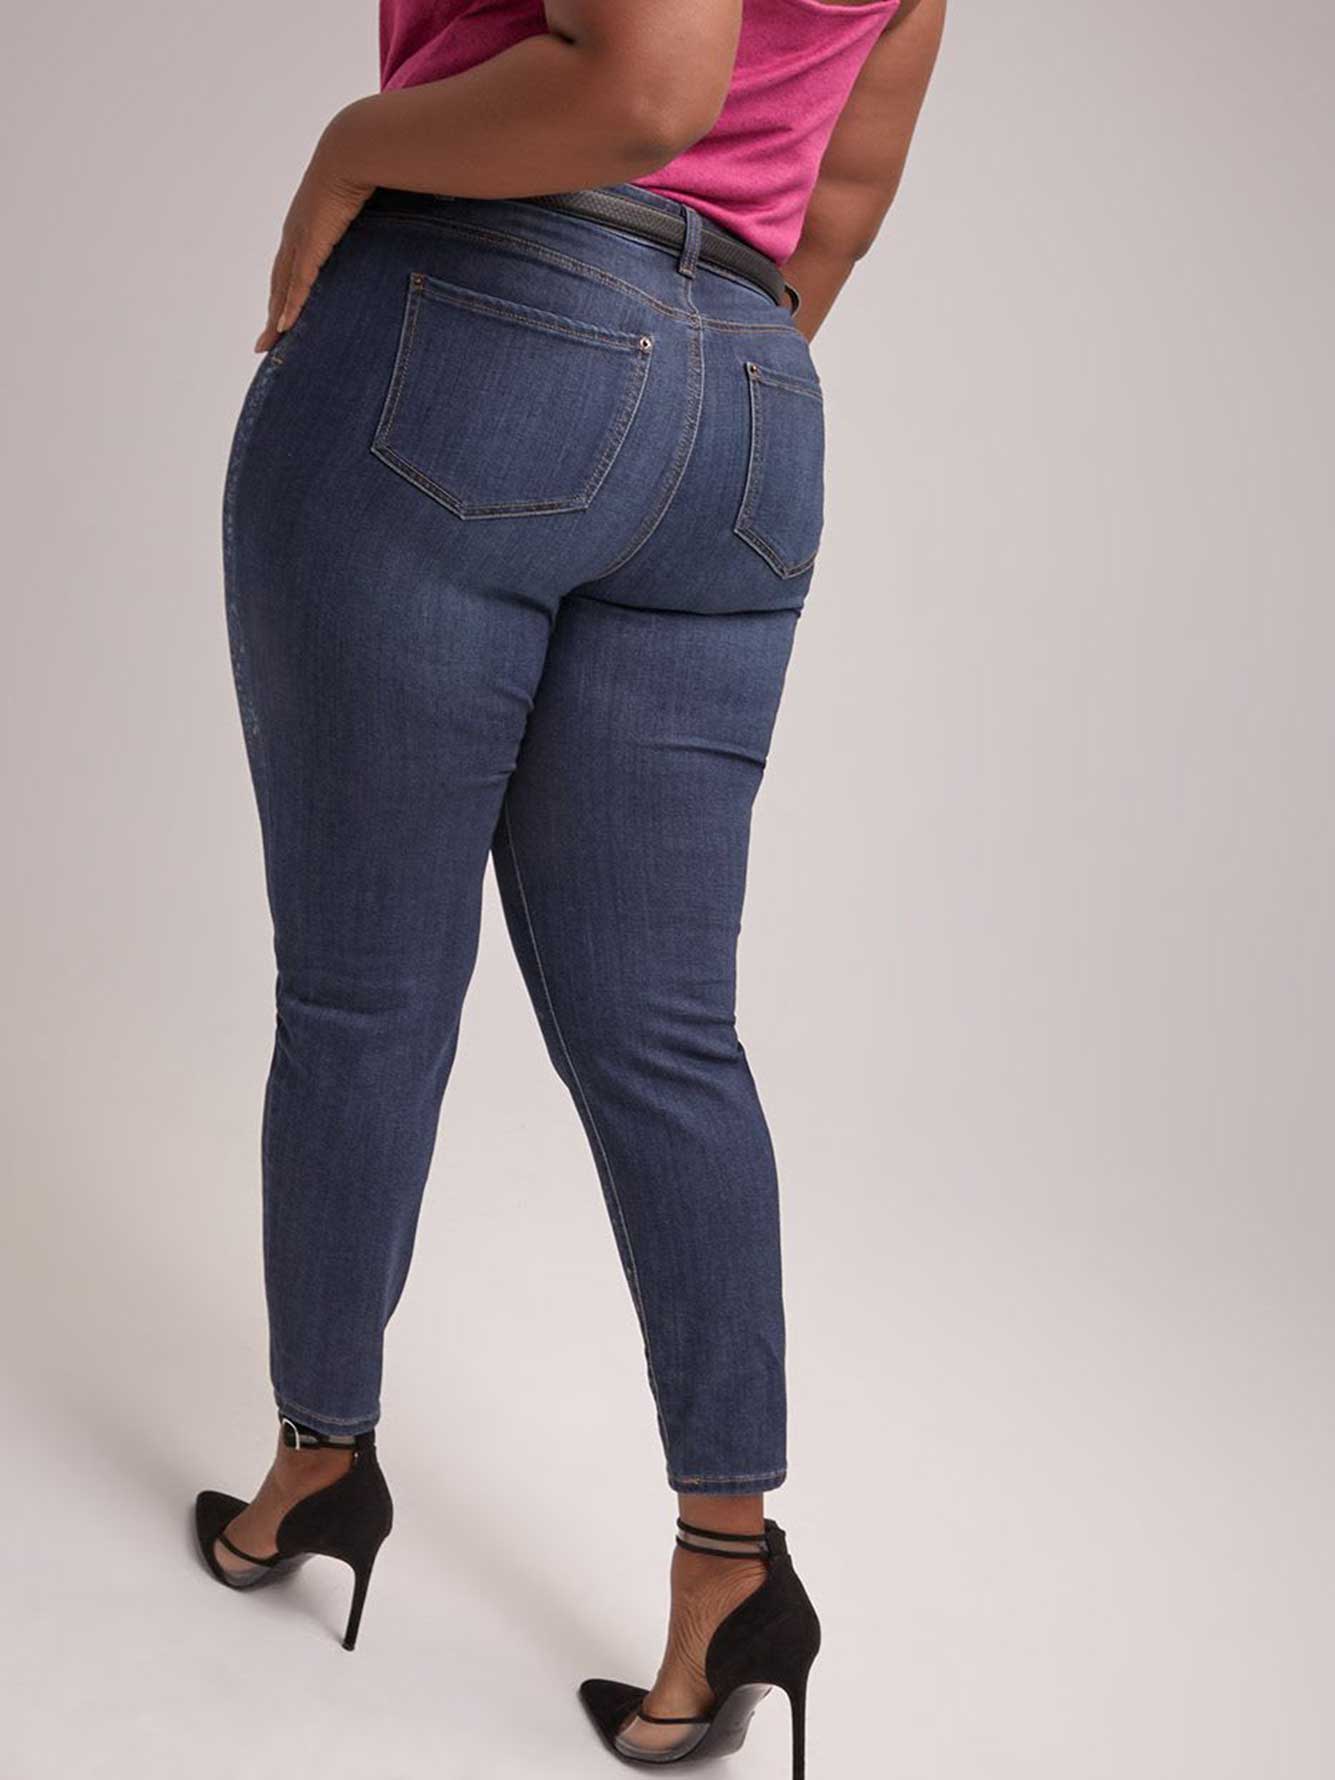 ONLINE ONLY - Tall Slightly Curvy Skinny Leg Jean with Print - d/C ...